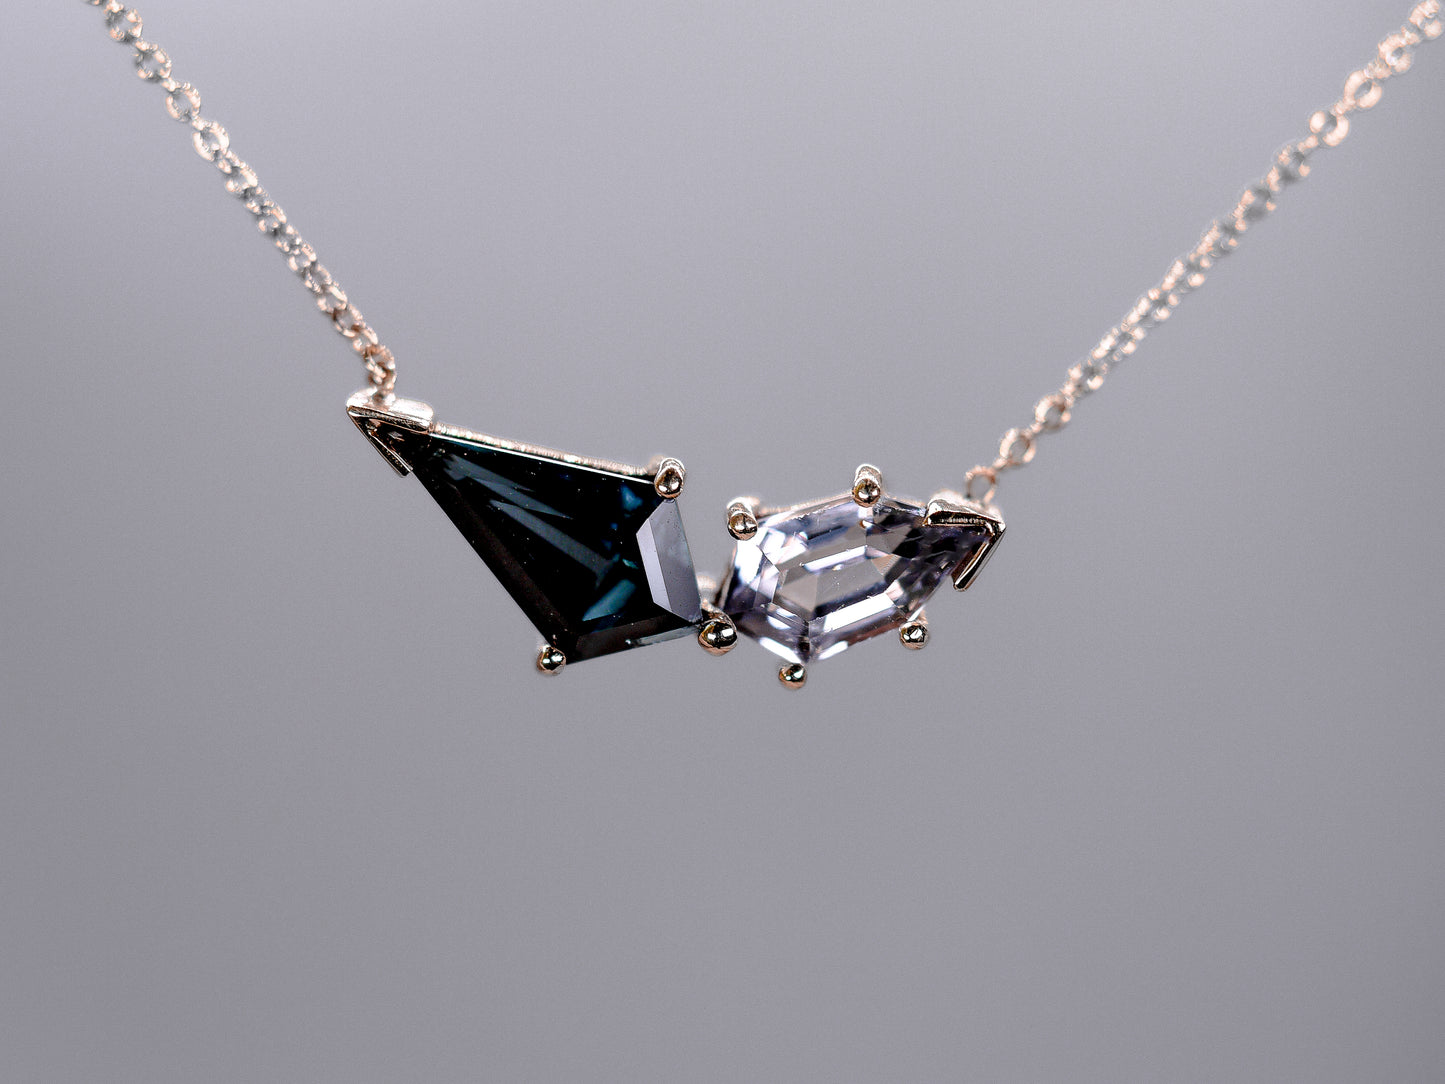 TWO KNIGHTS Necklace